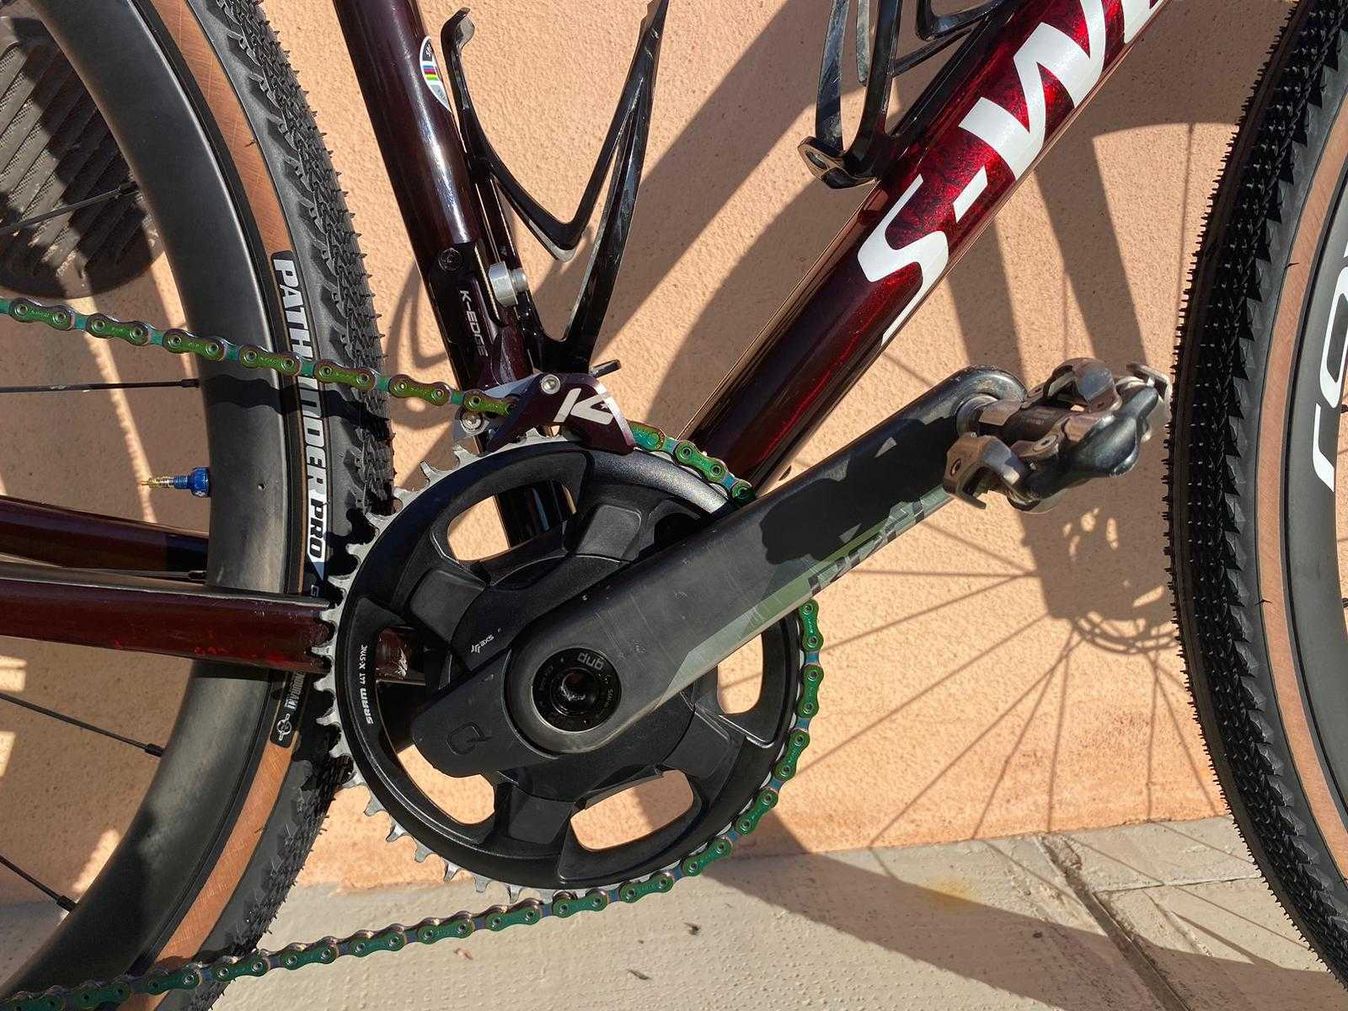 The 44t SRAM chainring